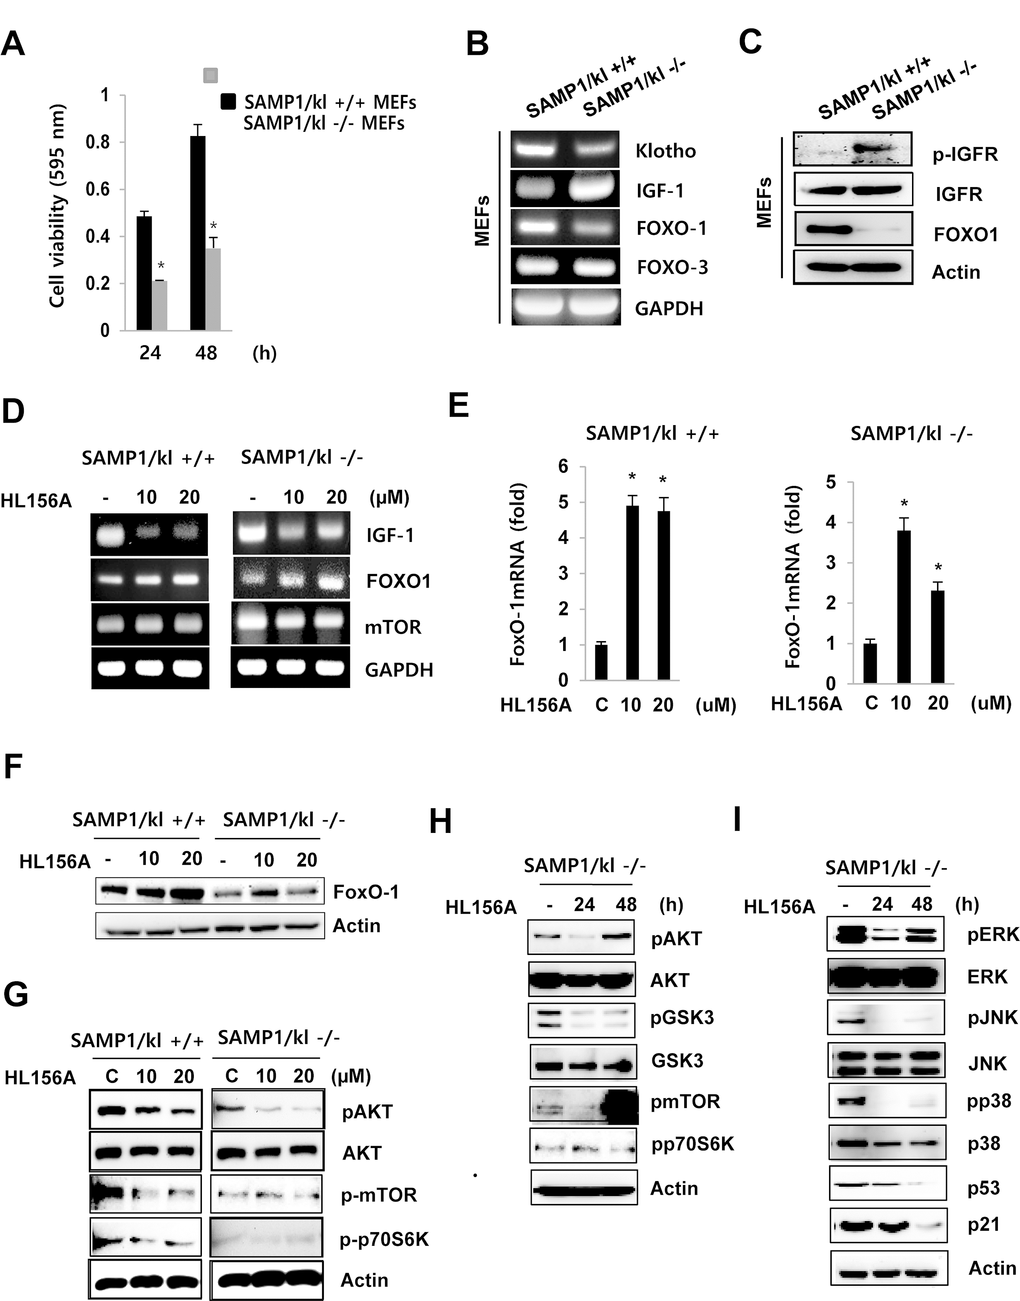 Effect of HL156A on IGF-I-mediated FoxO1 signaling in SAMP1/kl-/- MEFs. (A) Effect of SAMP1/kl-/- depletion on cell proliferation. SAMP1/kl+/+ and SAMP1/kl-/- MEFs were plated in 48-well plates at a density of 5 x 104 cells/well, and cell proliferation was evaluated using MTT assays after 24 and 48 h. (B) Comparison of IGF-1, FOXO1, and FOXO3 expression in SAMP1/kl+/+ and SAMP1/kl-/- MEFs. Total RNA was extracted from SAMP1/kl+/+ and SAMP1/kl-/- MEFs. cDNA was synthesized by reverse transcription-polymerase chain reaction (RT-PCR). (C) The mRNA levels of IFGR and FOXO1 were determined in SAMP1/kl+/+ and SAMP1/kl-/- MEFs. Total protein was extracted, and the protein levels of IFGR, p-IGFR, and FOXO1 were measured by Western blot. Actin was used as a loading control. (D) The effect of HL156A on IGF-1 signaling. SAMP1/kl+/+ and SAMP1/kl-/- MEFs were incubated in the absence or presence of HL156A (10 or 20 μM) for 24 h, and total RNA was then isolated and subjected to RT-PCR analysis to determine the mRNA levels of IGF-I, FOXO1, and mTOR. (E) Changes in the mRNA abundance of FOXO1 were analyzed with real-time RT-PCR analysis in HL156A-treated SAMP1/kl+/+ and SAMP1/kl-/- MEFs. (F) HL156A induced FOXO1 expression. Cells were treated with HL156A for 24 h, and FOXO1 levels were then determined using Western blot analysis. (G) The effect of HL156A on IGF-I-mediated Akt/mTOR/p70S6K signaling. The expression of IGF-I-mediated Akt/mTOR/p70S6K proteins in SAMP1/kl+/+ and SAMP1/kl-/- MEFs treated with HL156A (10 or 20 μM) for 24 h. (H) Immunoblotting analysis of GSK3β, Akt, mTOR, and p70S6K expression in SAMP1/kl-/- MEFs treated for 24 or 48 h with 20 μM HL156A. (I) Effects of HL156A on MAPK activation in SAMP1/kl-/- MEFs.